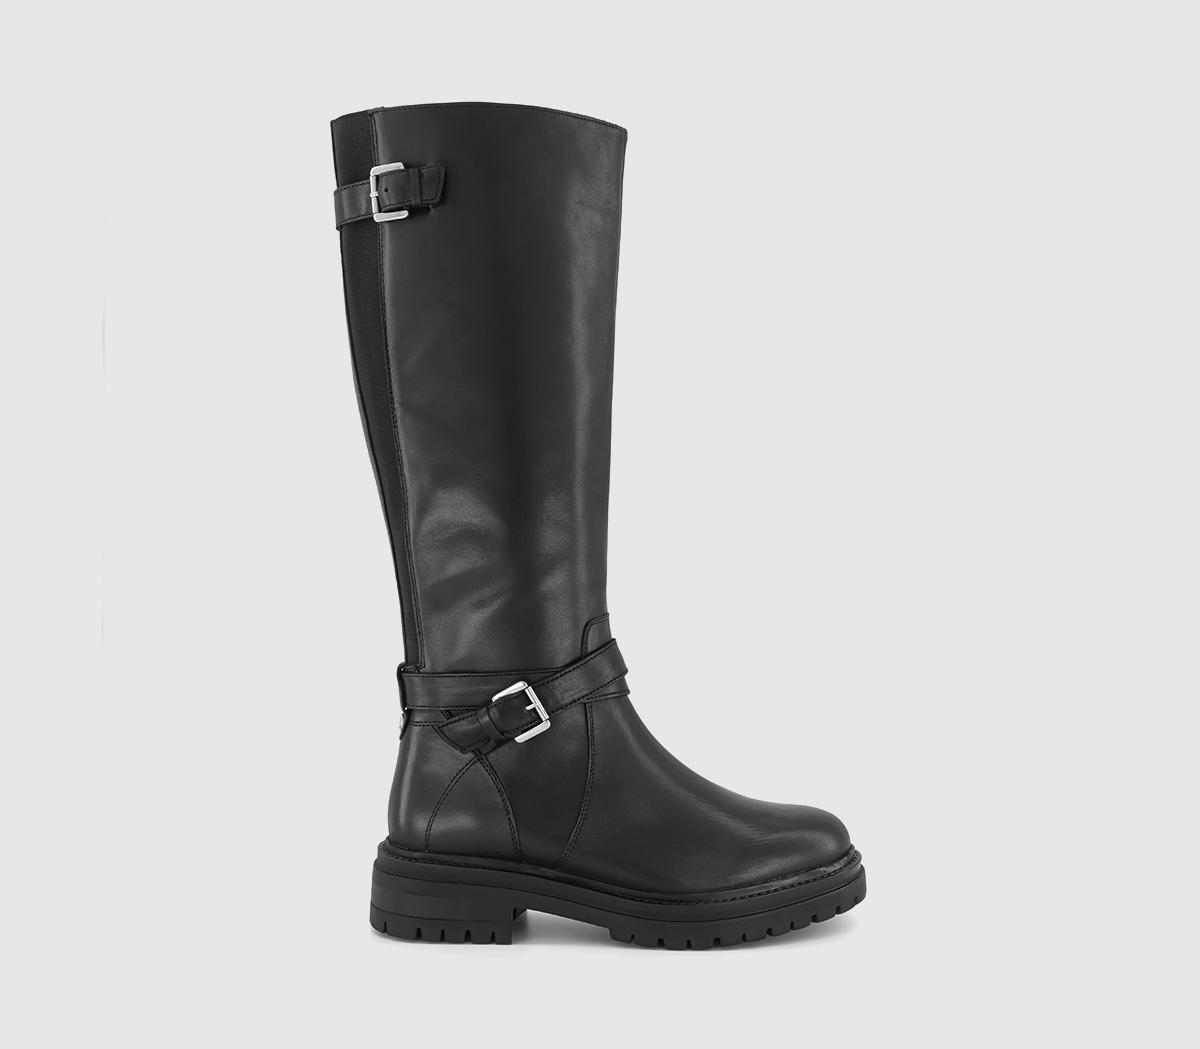 OFFICE Krissy Buckle Strap Knee High Rider Boots Black Leather - Knee ...